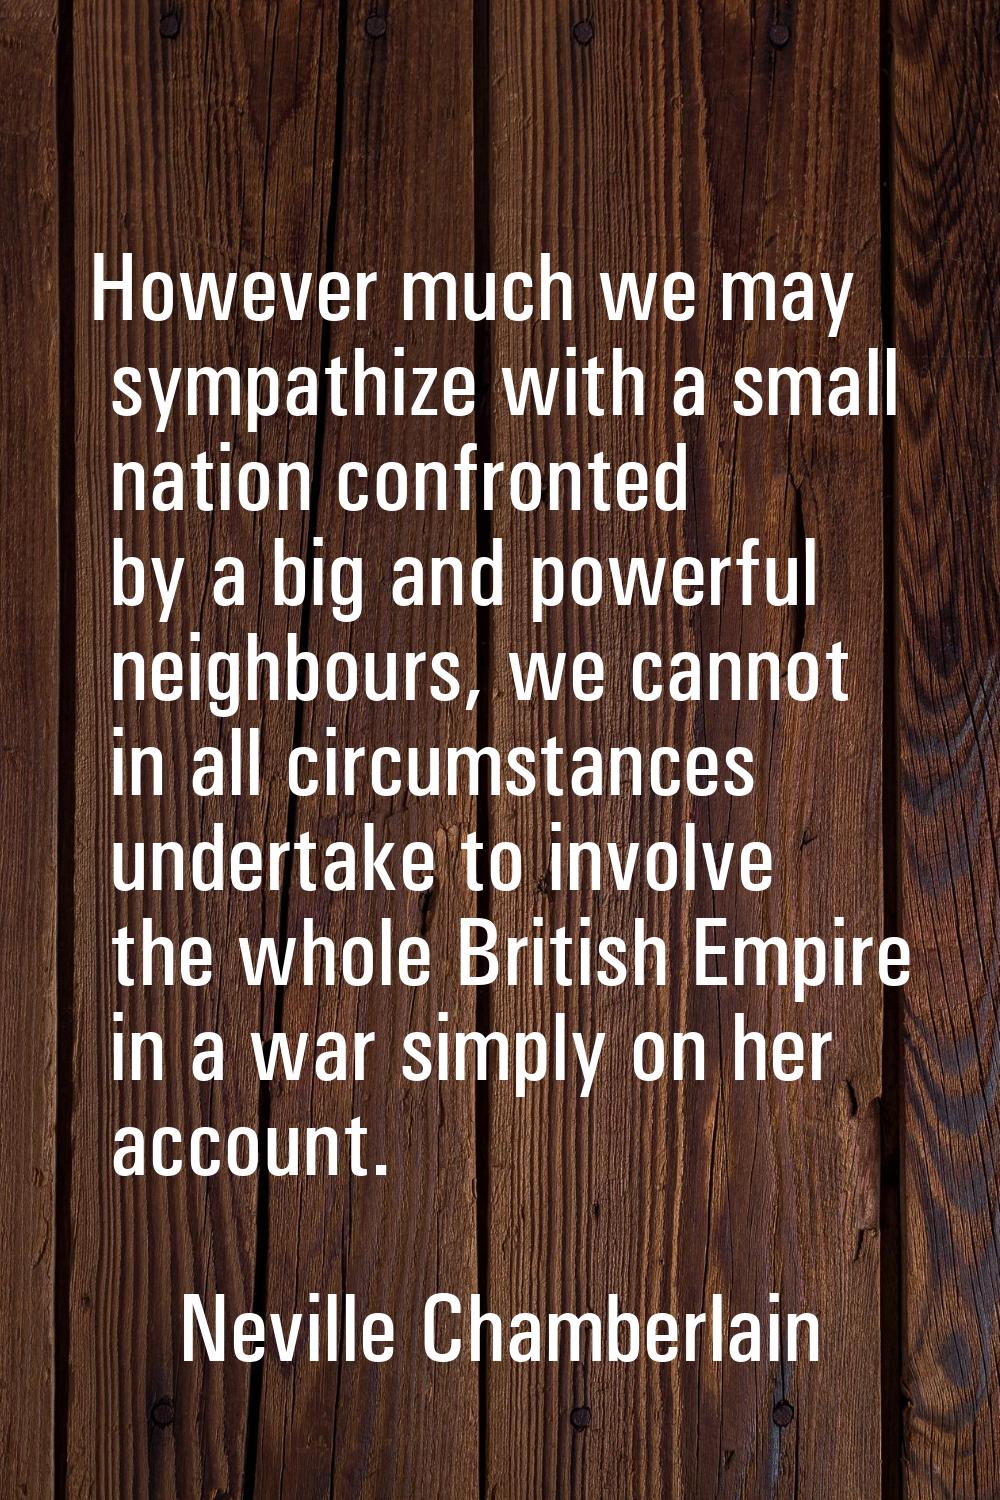 However much we may sympathize with a small nation confronted by a big and powerful neighbours, we 